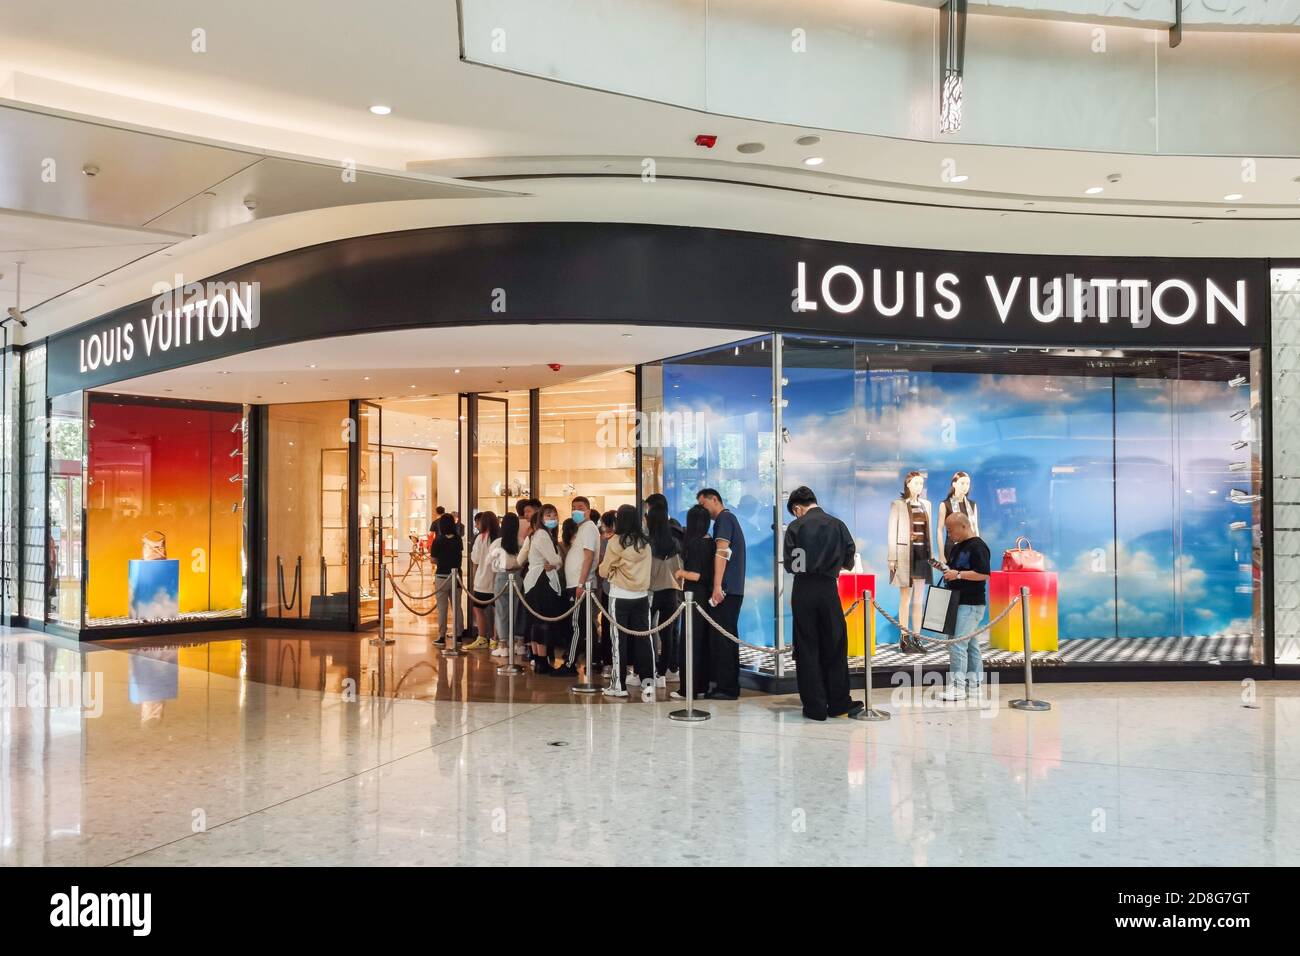 People Waiting In Line To Enter Louis Vuitton Paris France Stock Photo -  Download Image Now - iStock